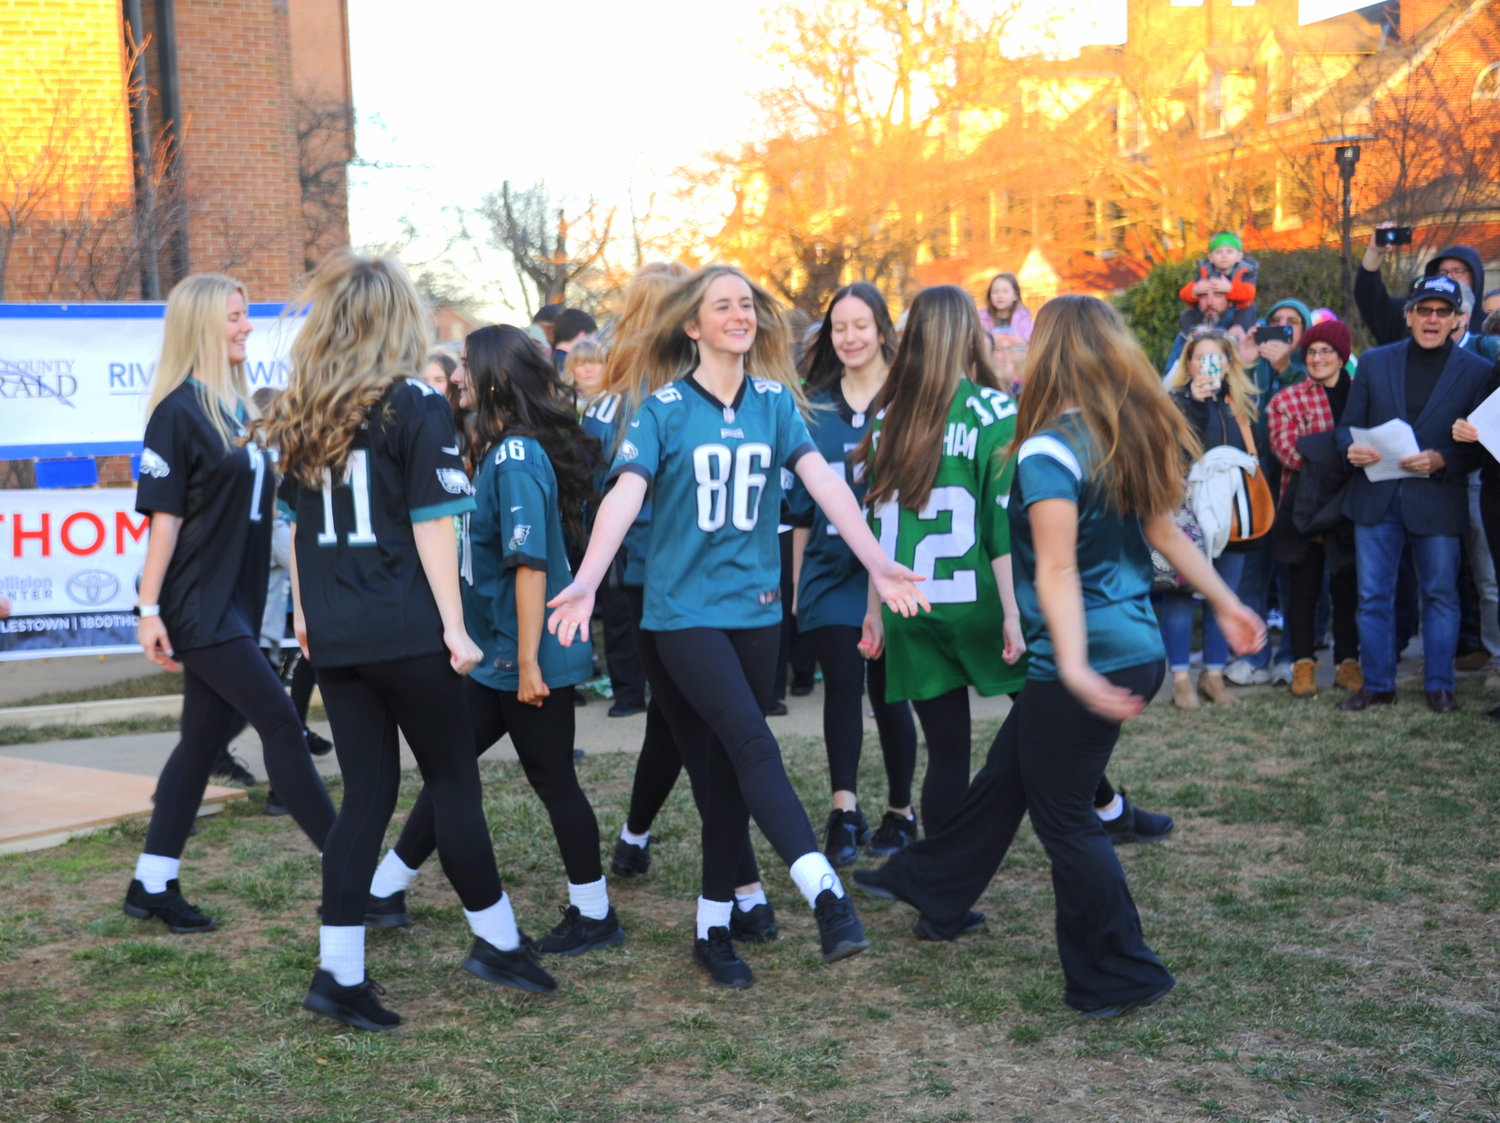 Members of the Fitzpatrick School of Irish Dance pay tribute to the Philadelphia Eagles Friday night at the Herald’s “Bucks County Loves the Birds” pep rally on the lawn of the old county courthouse in Doylestown.